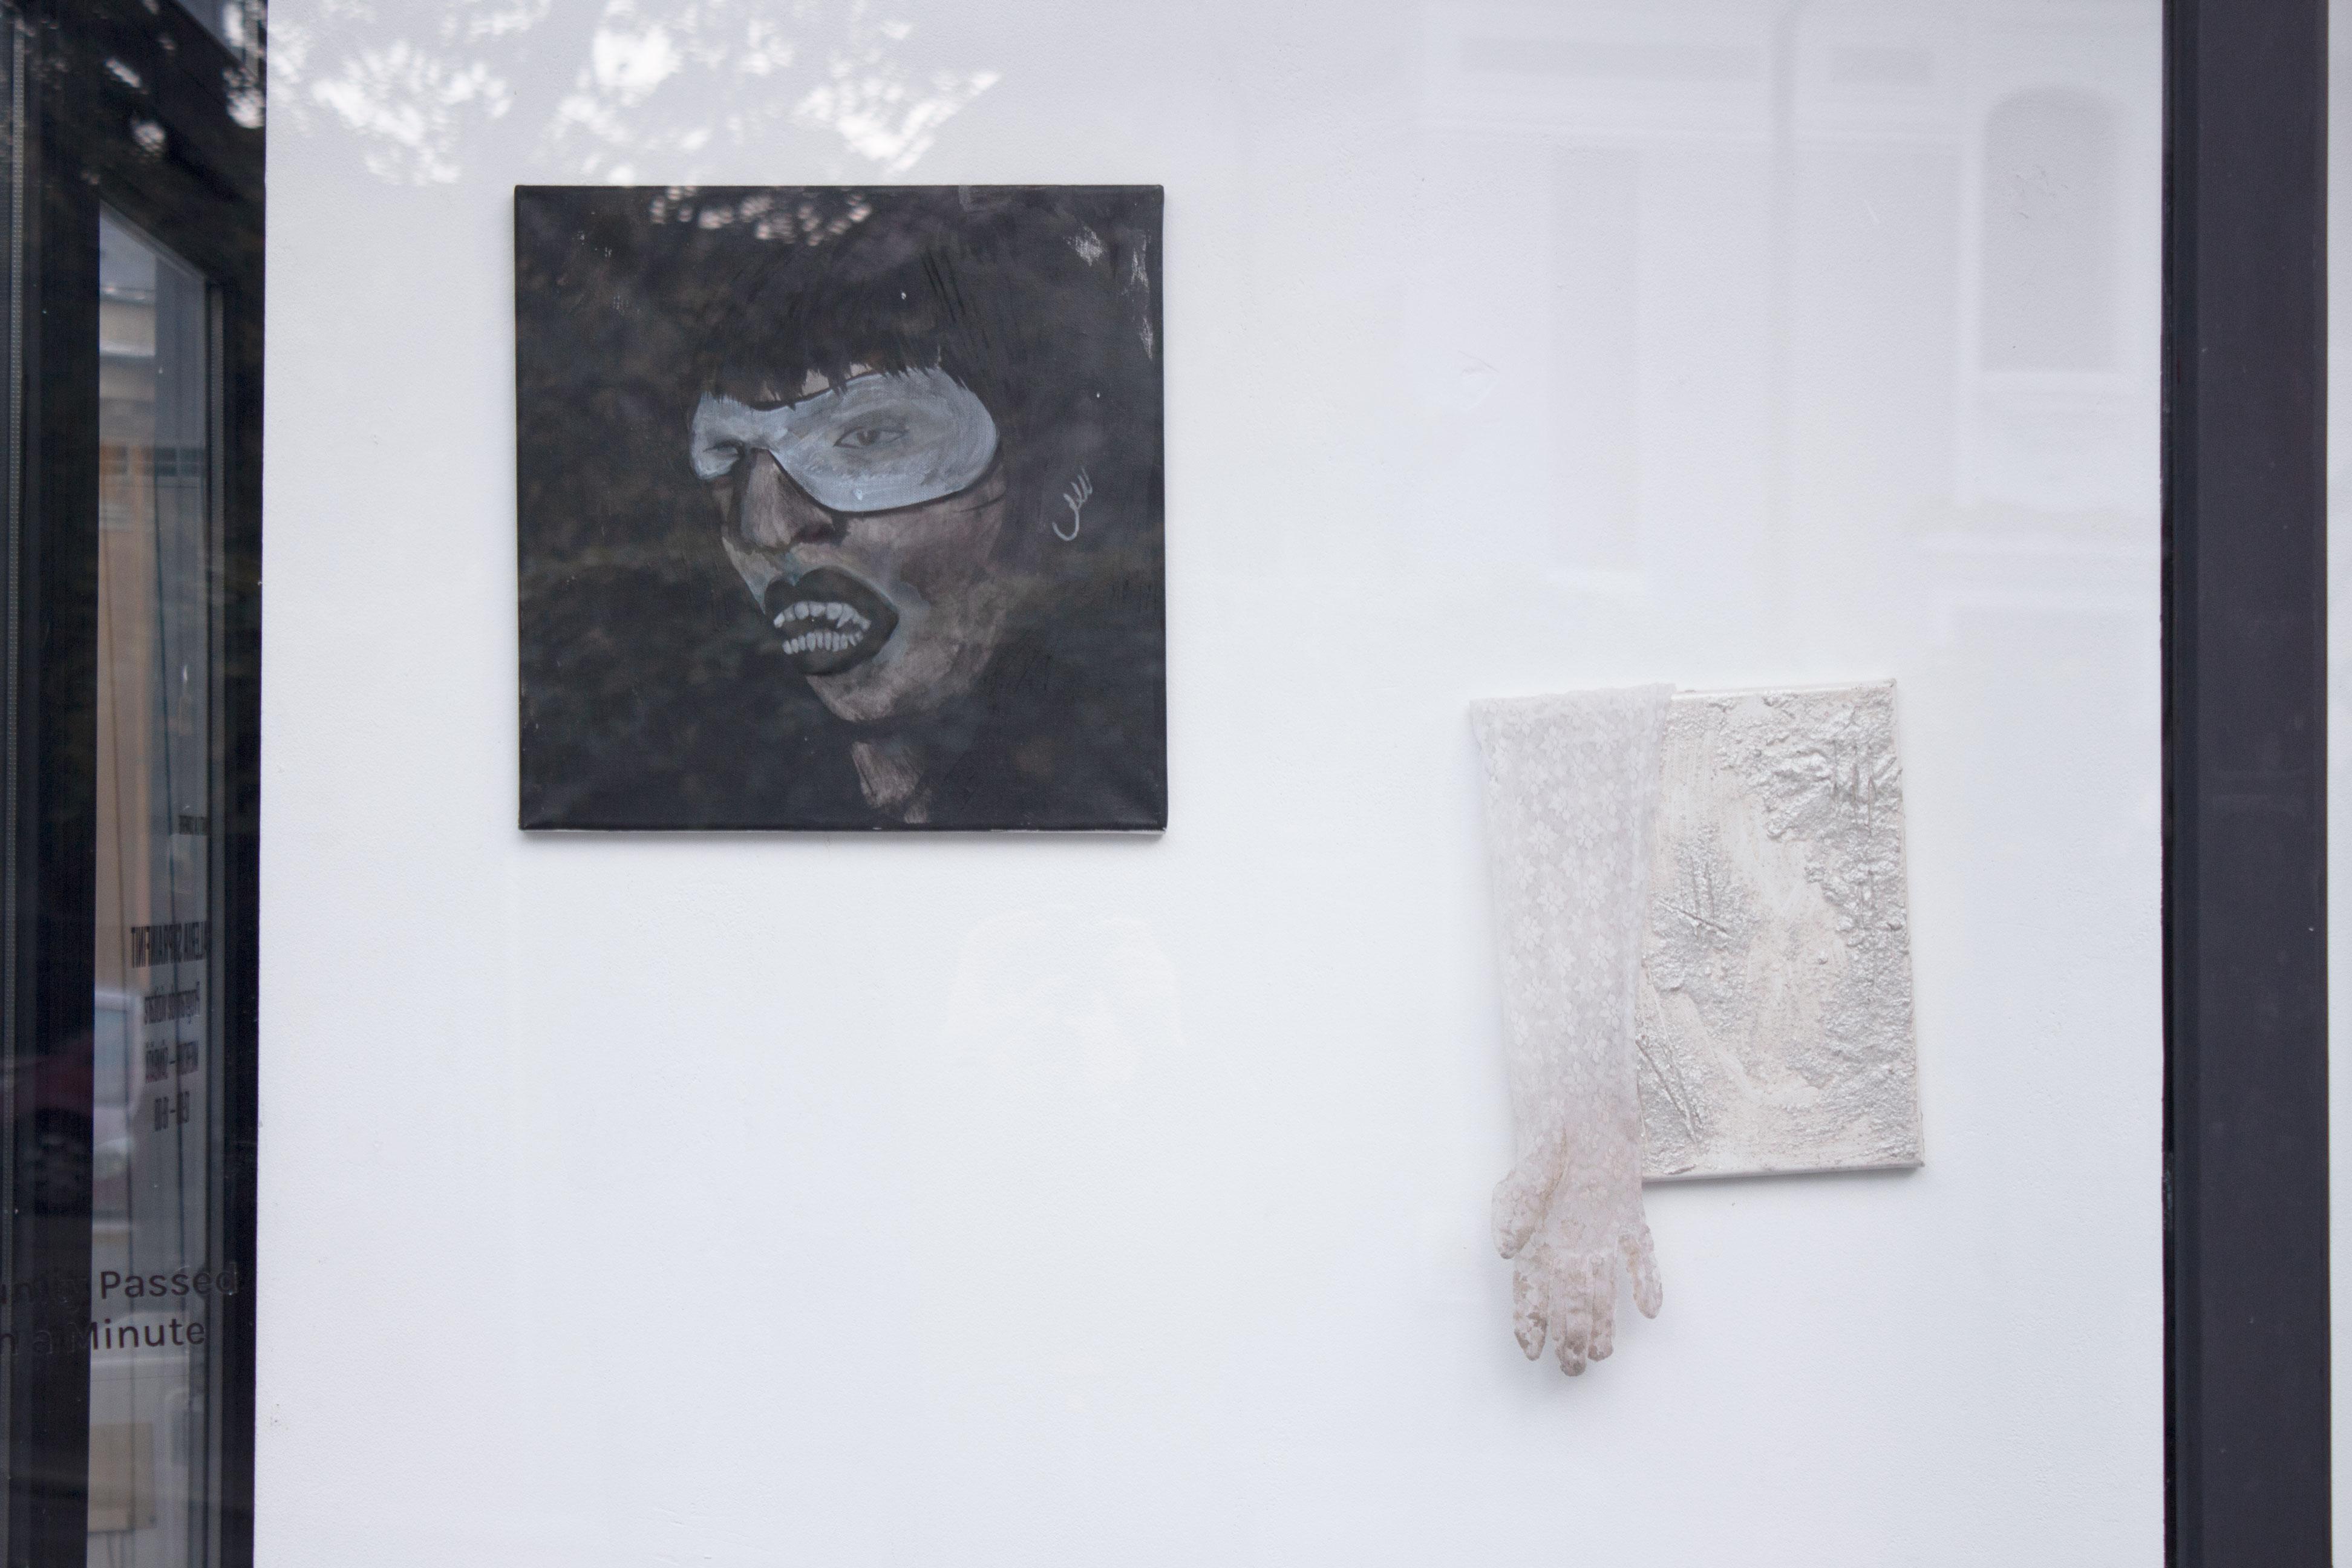 Adriana Preda, The Opportunity Passed in Less Than a Minute, 2023, installation view